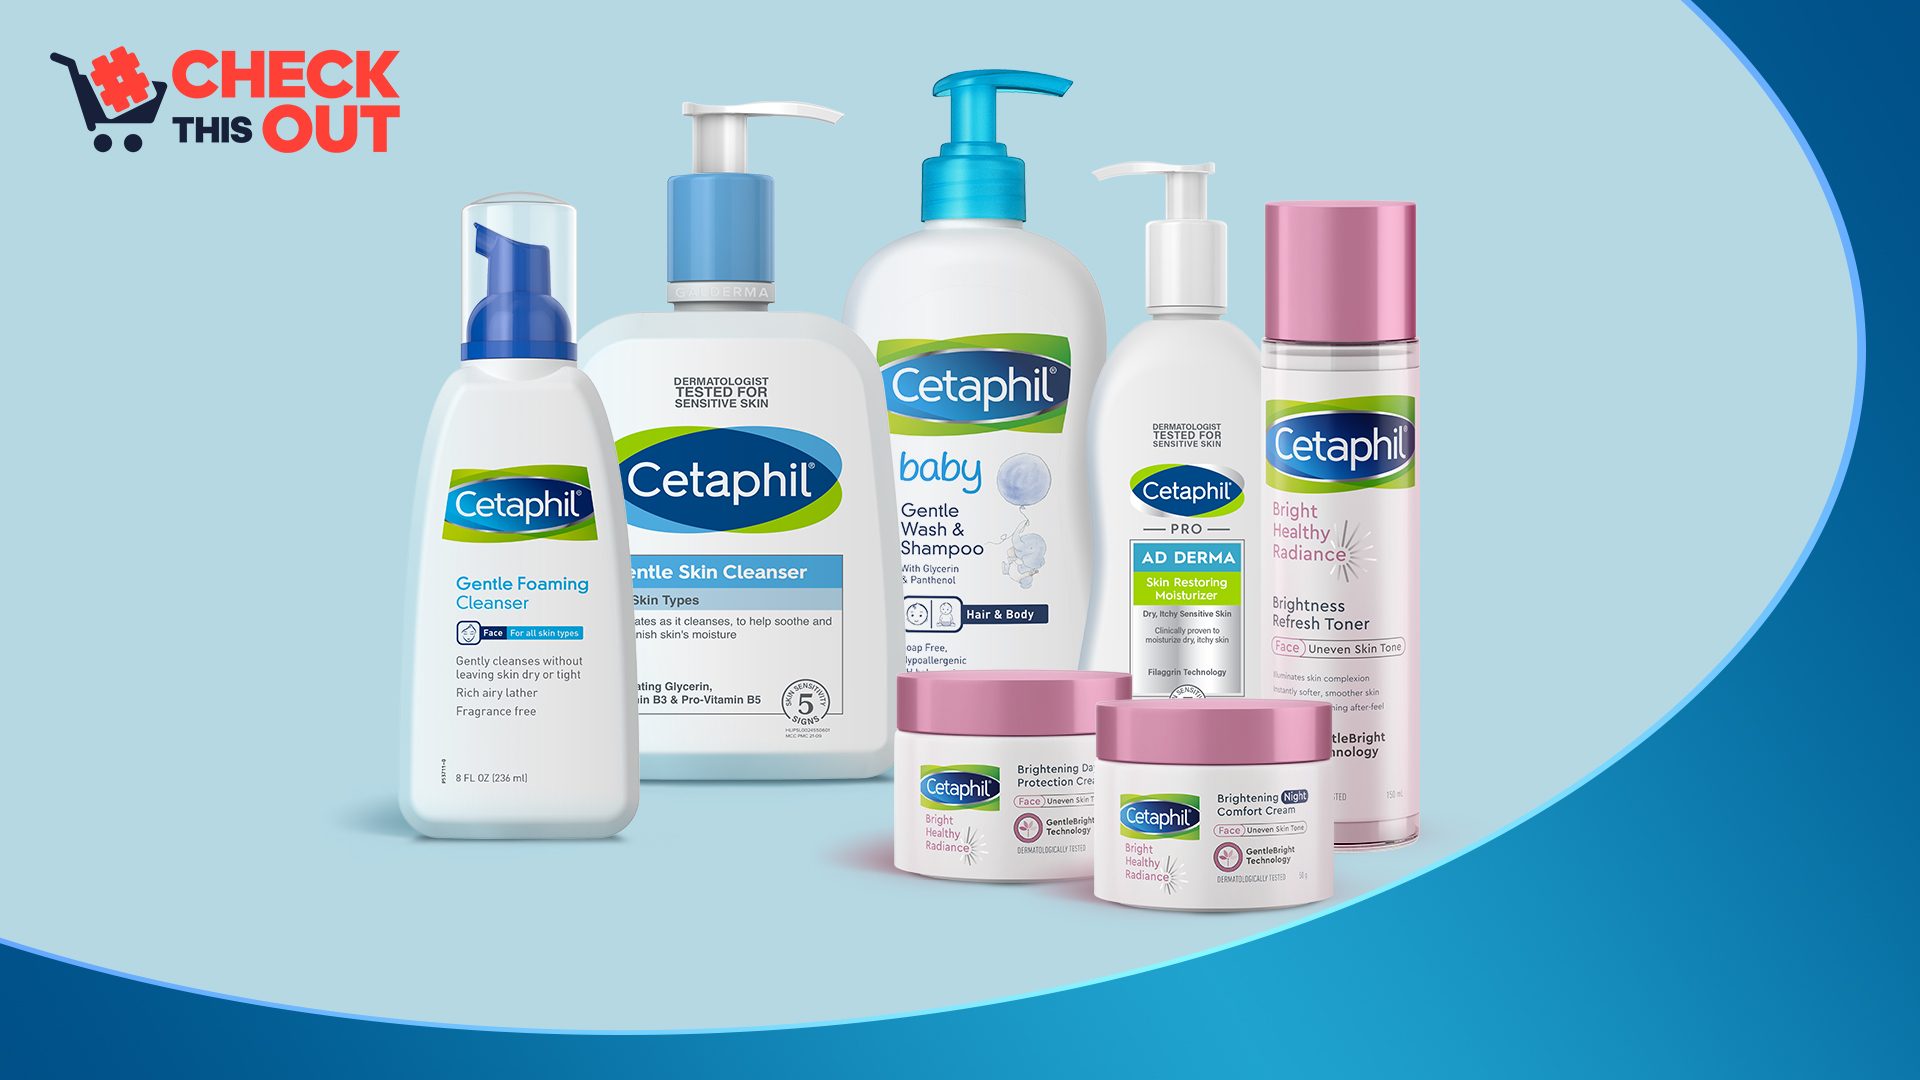 #CheckThisOut: What are the right Cetaphil products for your sensitive skin?